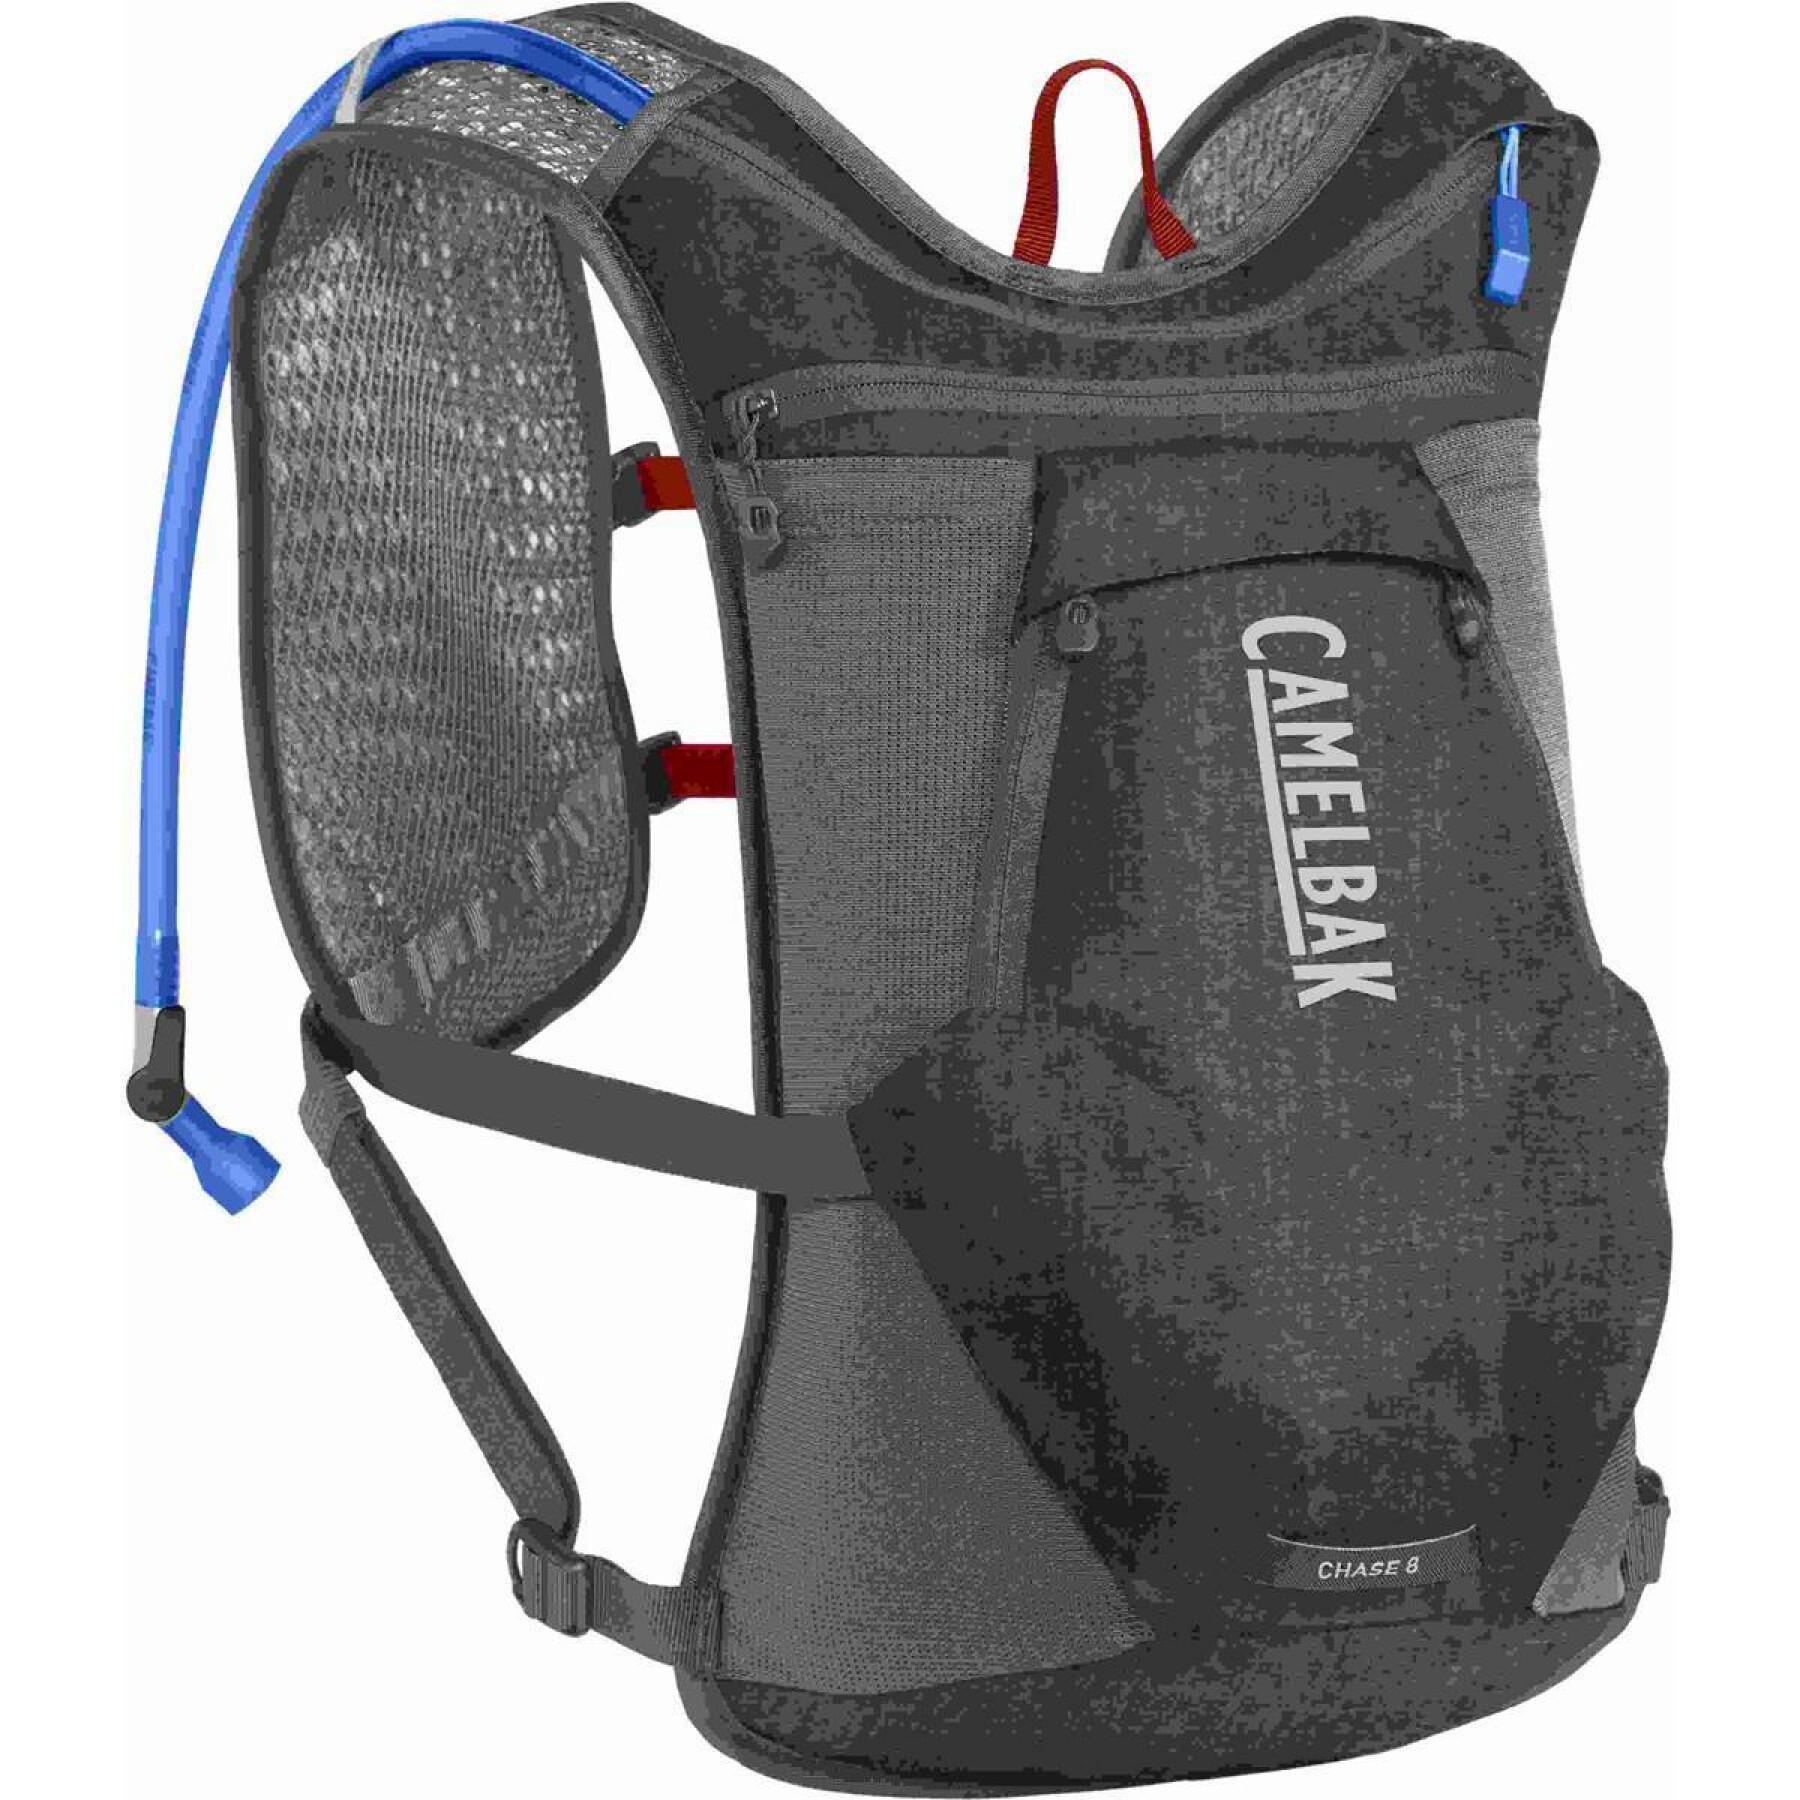 Backpack limited edition fusion water pouch Camelbak Chase 8 Vest